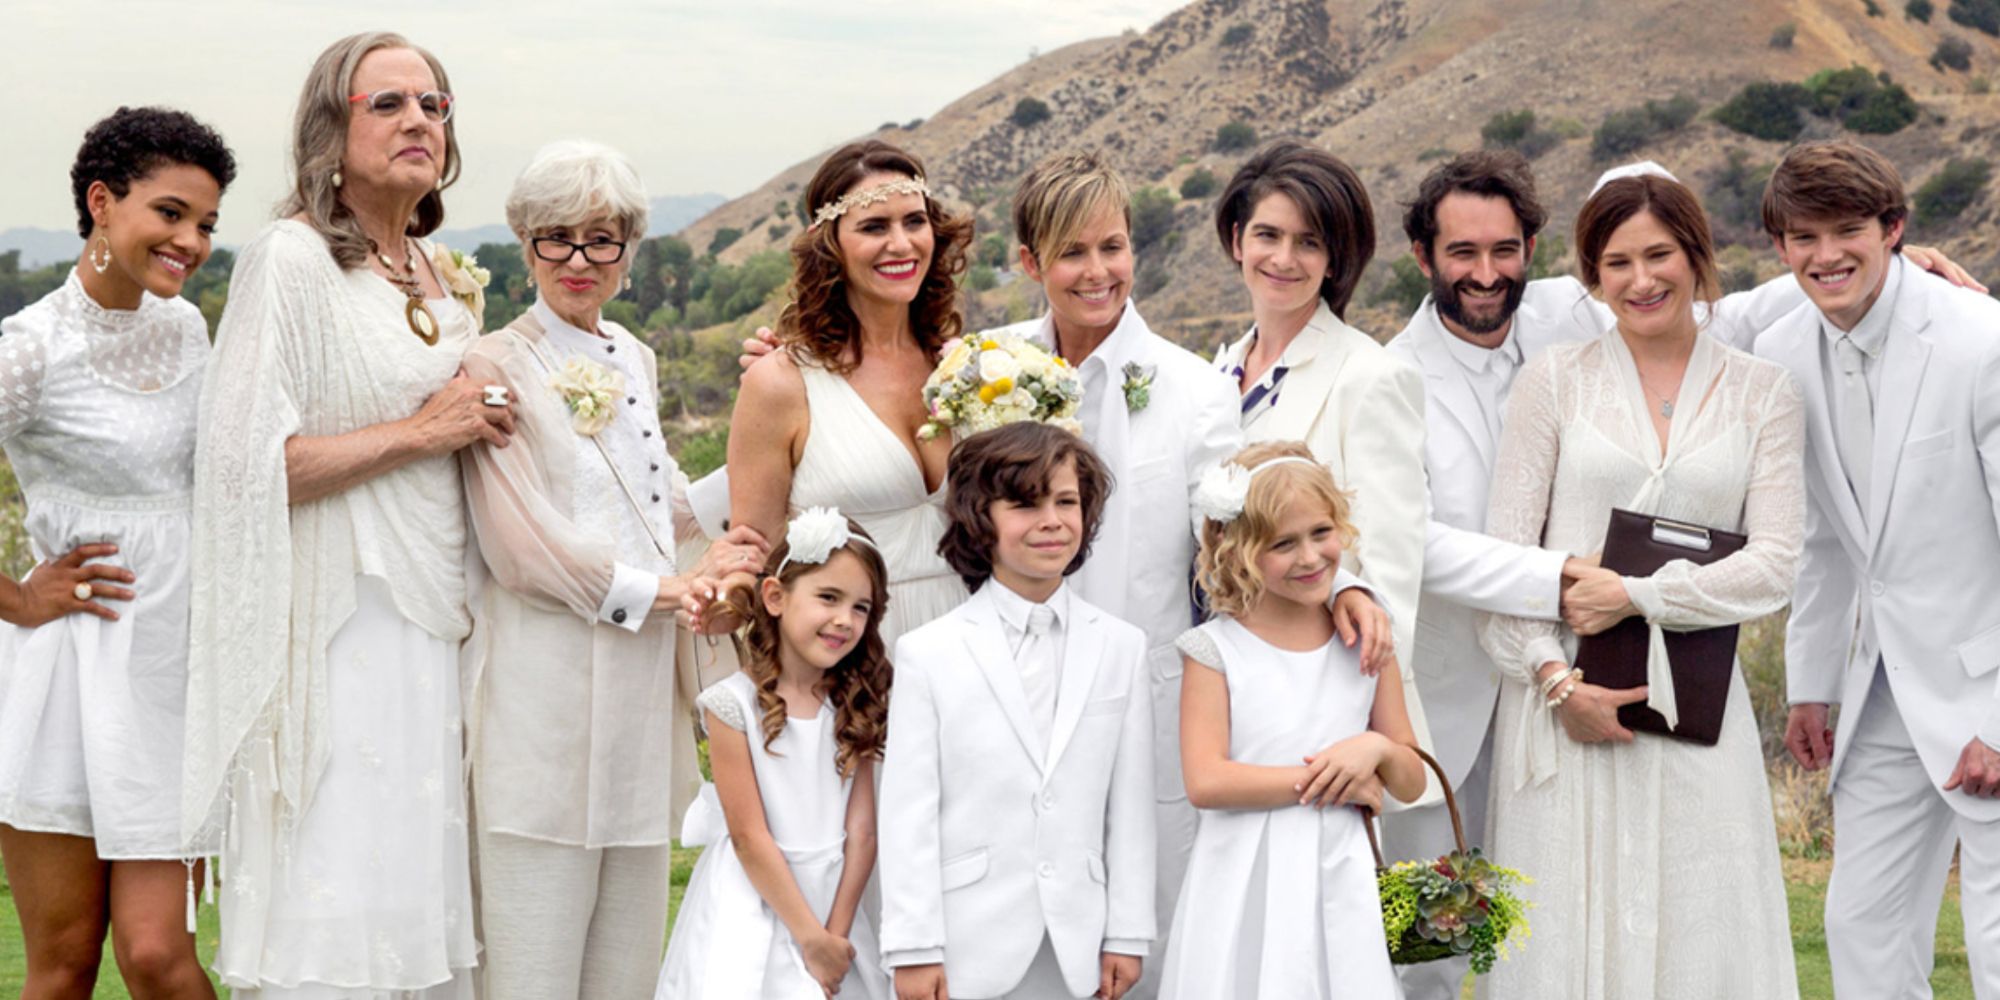 The cast of the show Transparent dressed in white.